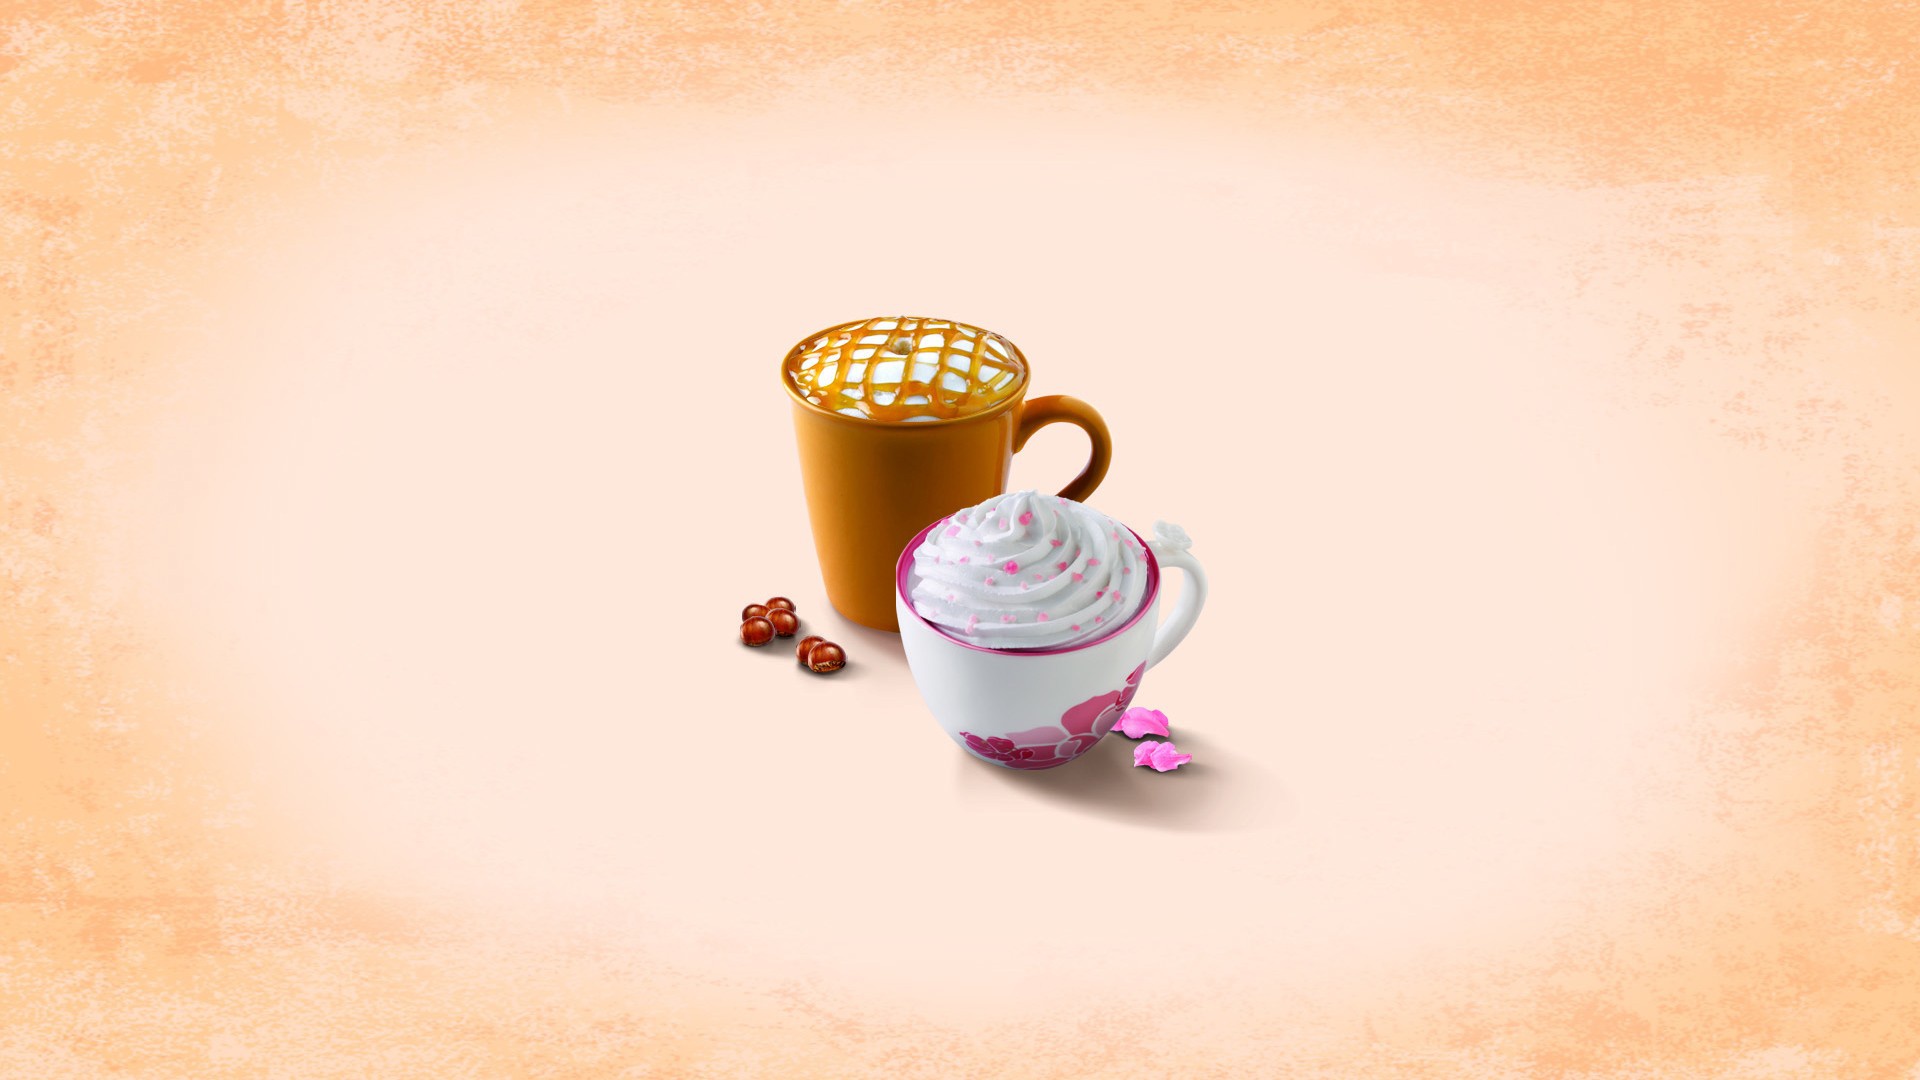 Wallpapers cups cream coffee on the desktop